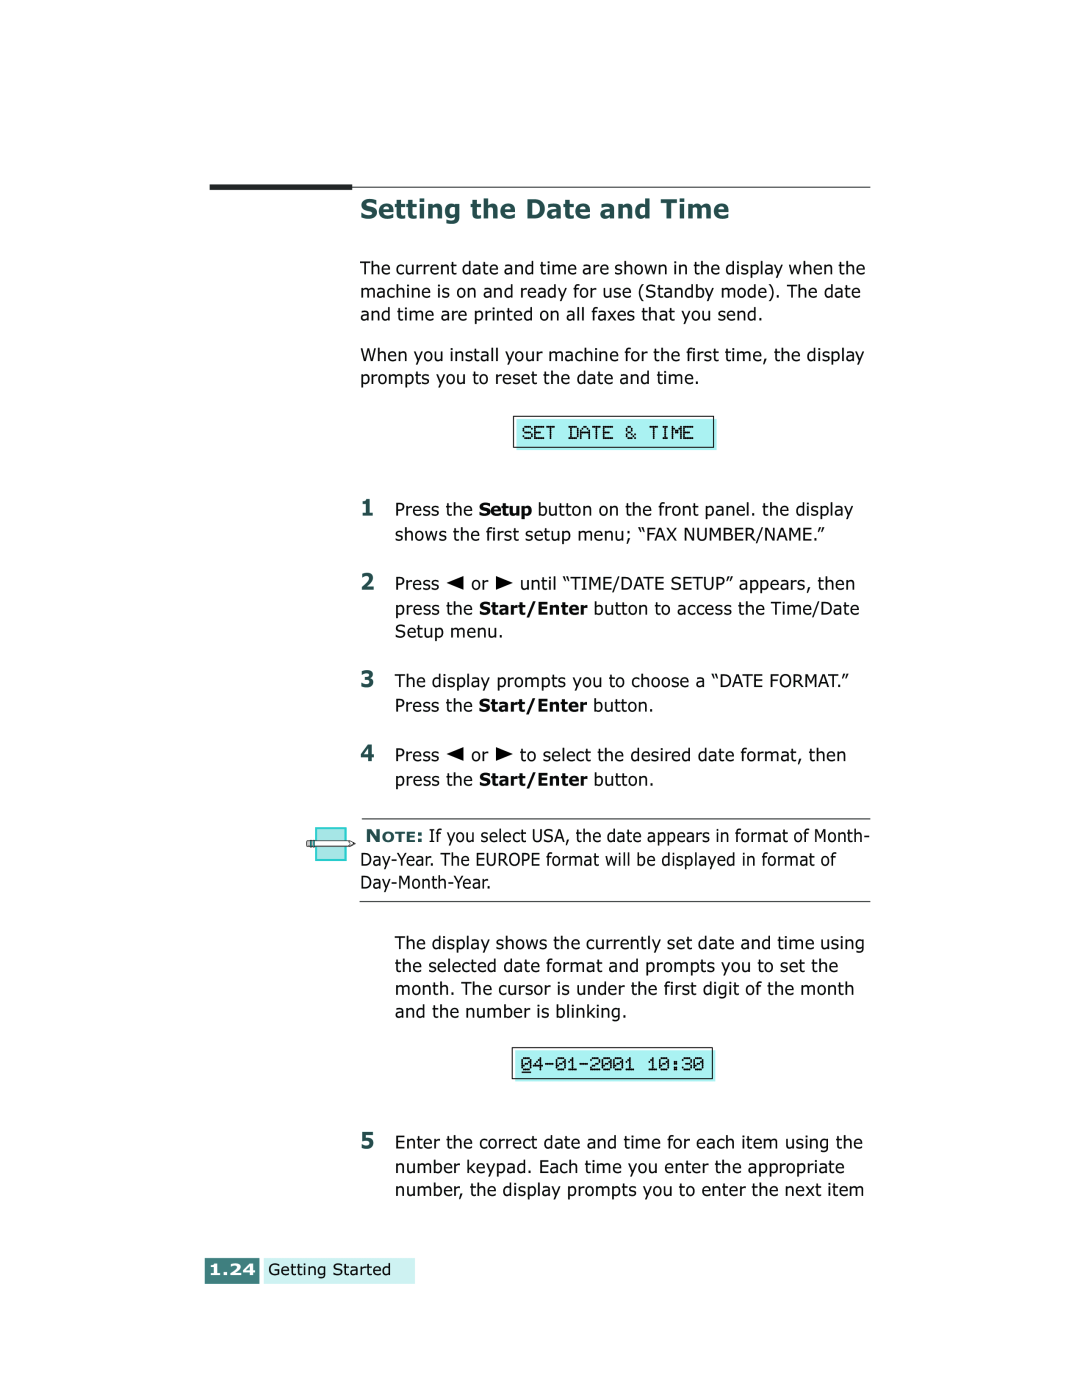 Xerox Pro 580 manual Setting the Date and Time 